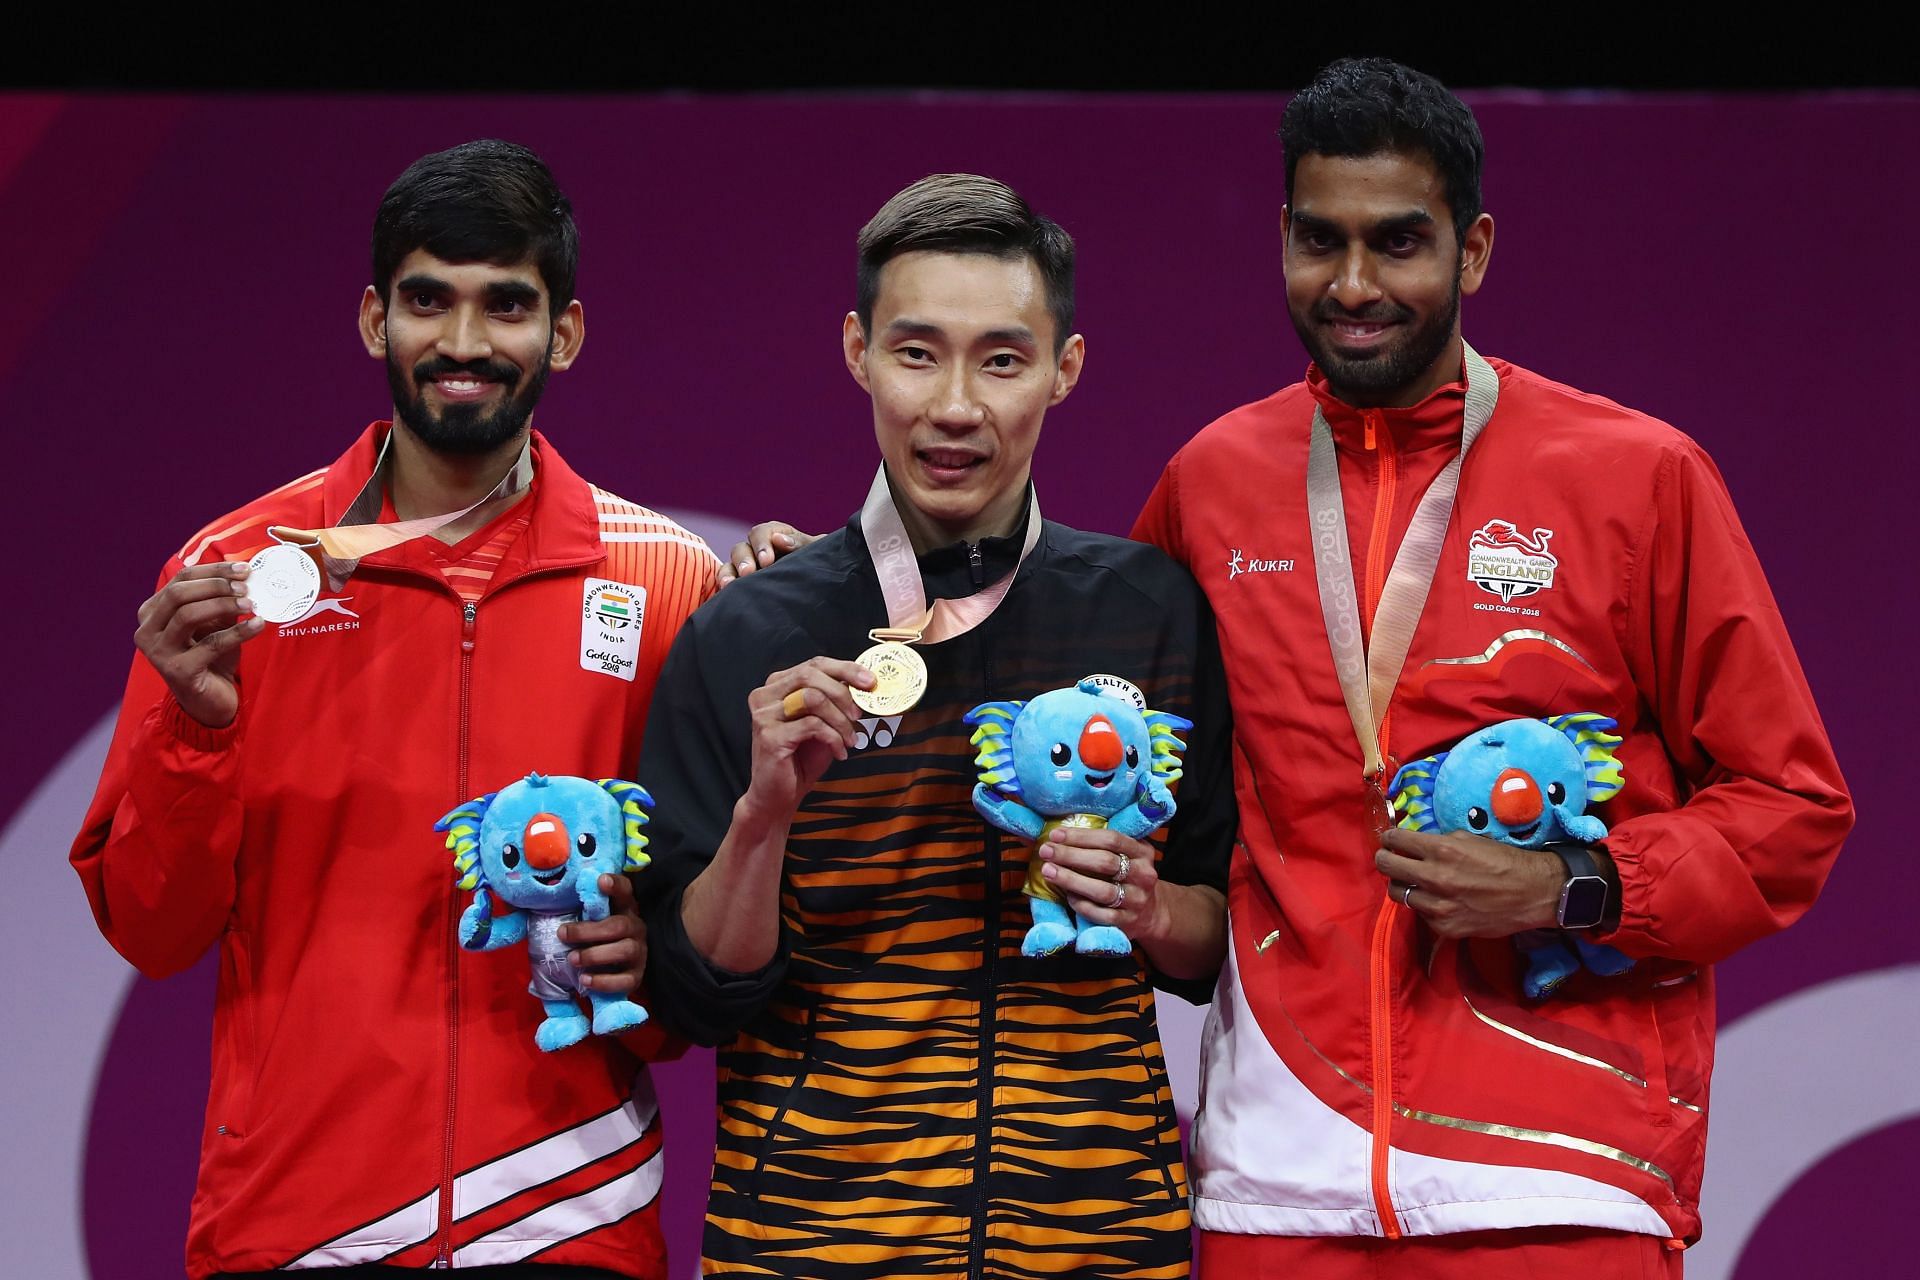 Kidambi Srikanth (extreme left) won the men's singles silver medal at the 2018 Commonwealth Games.  (Image courtesy: Getty)